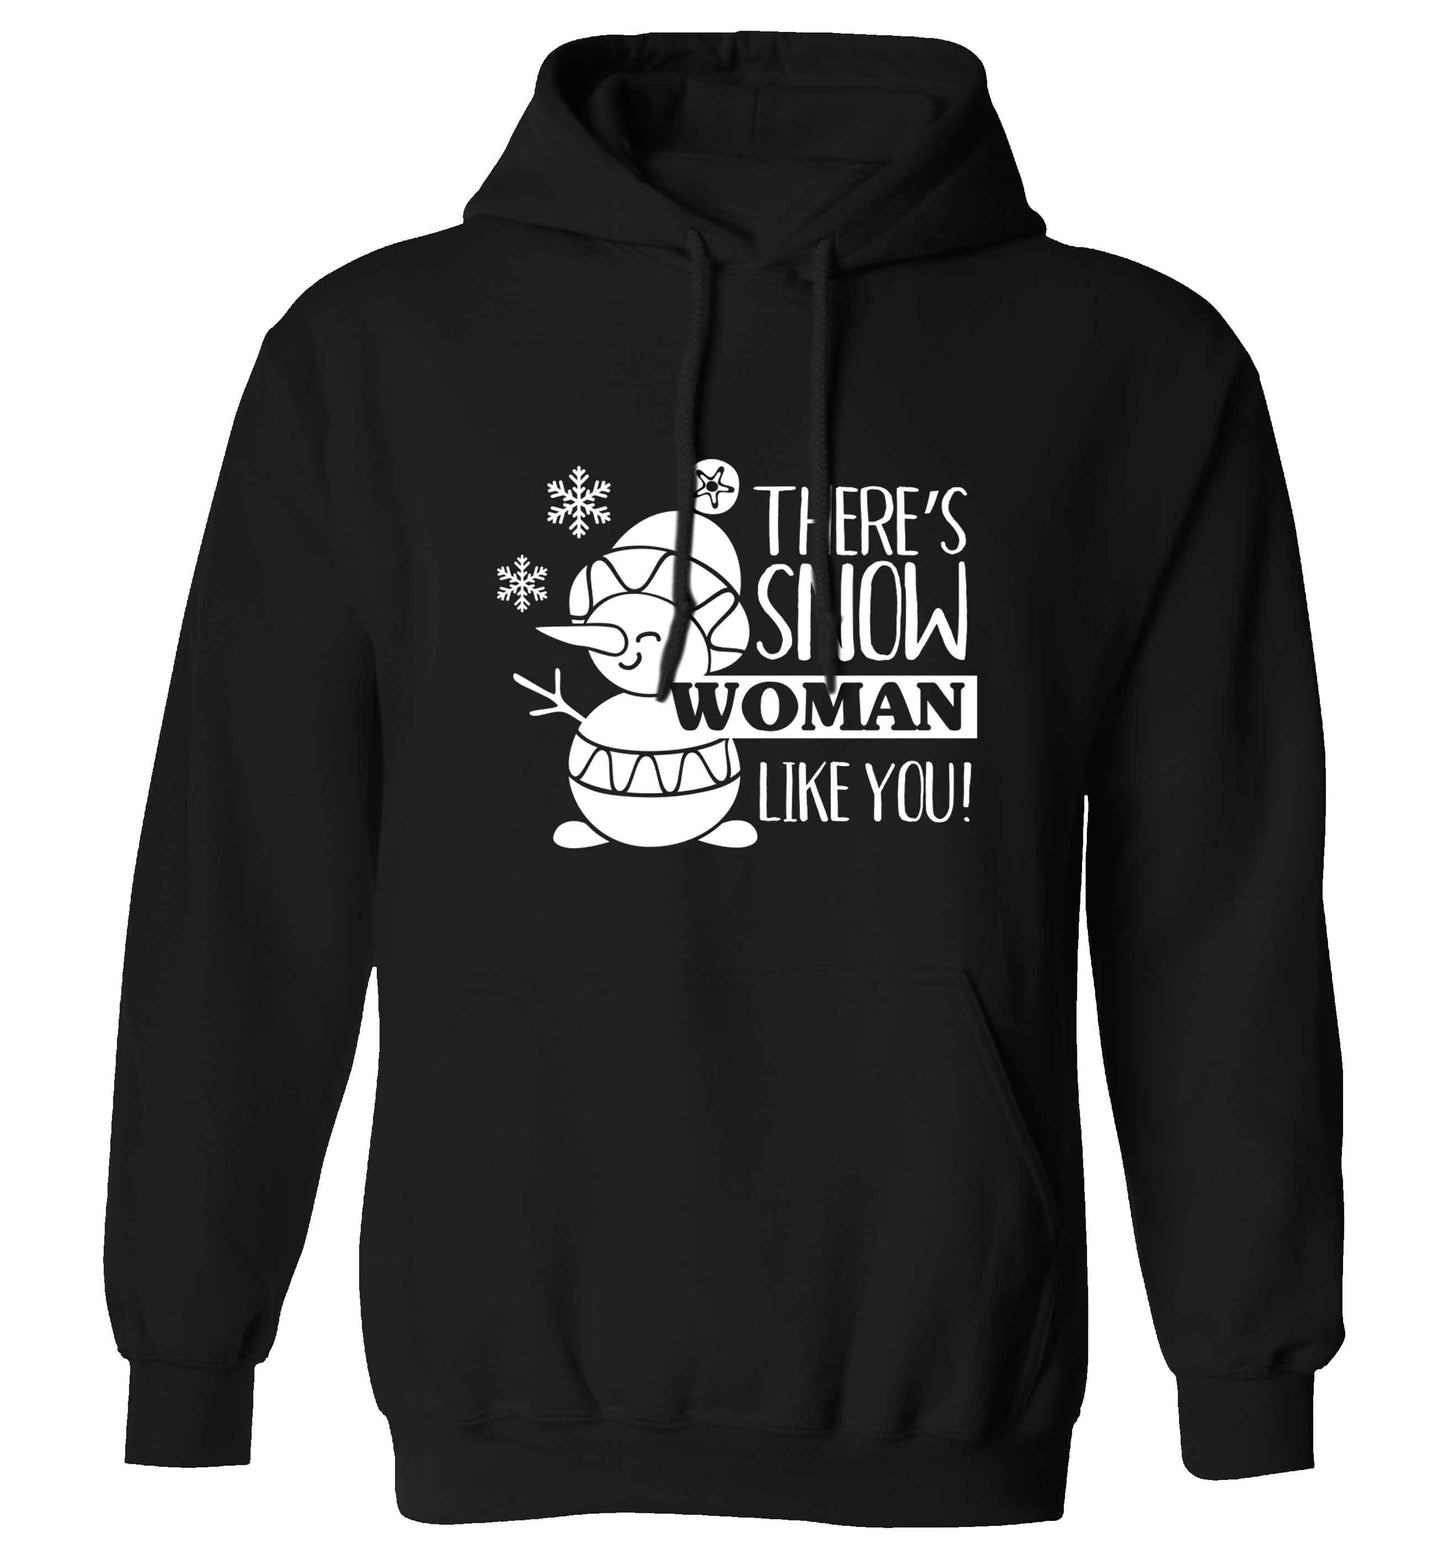 There's snow woman like you adults unisex black hoodie 2XL